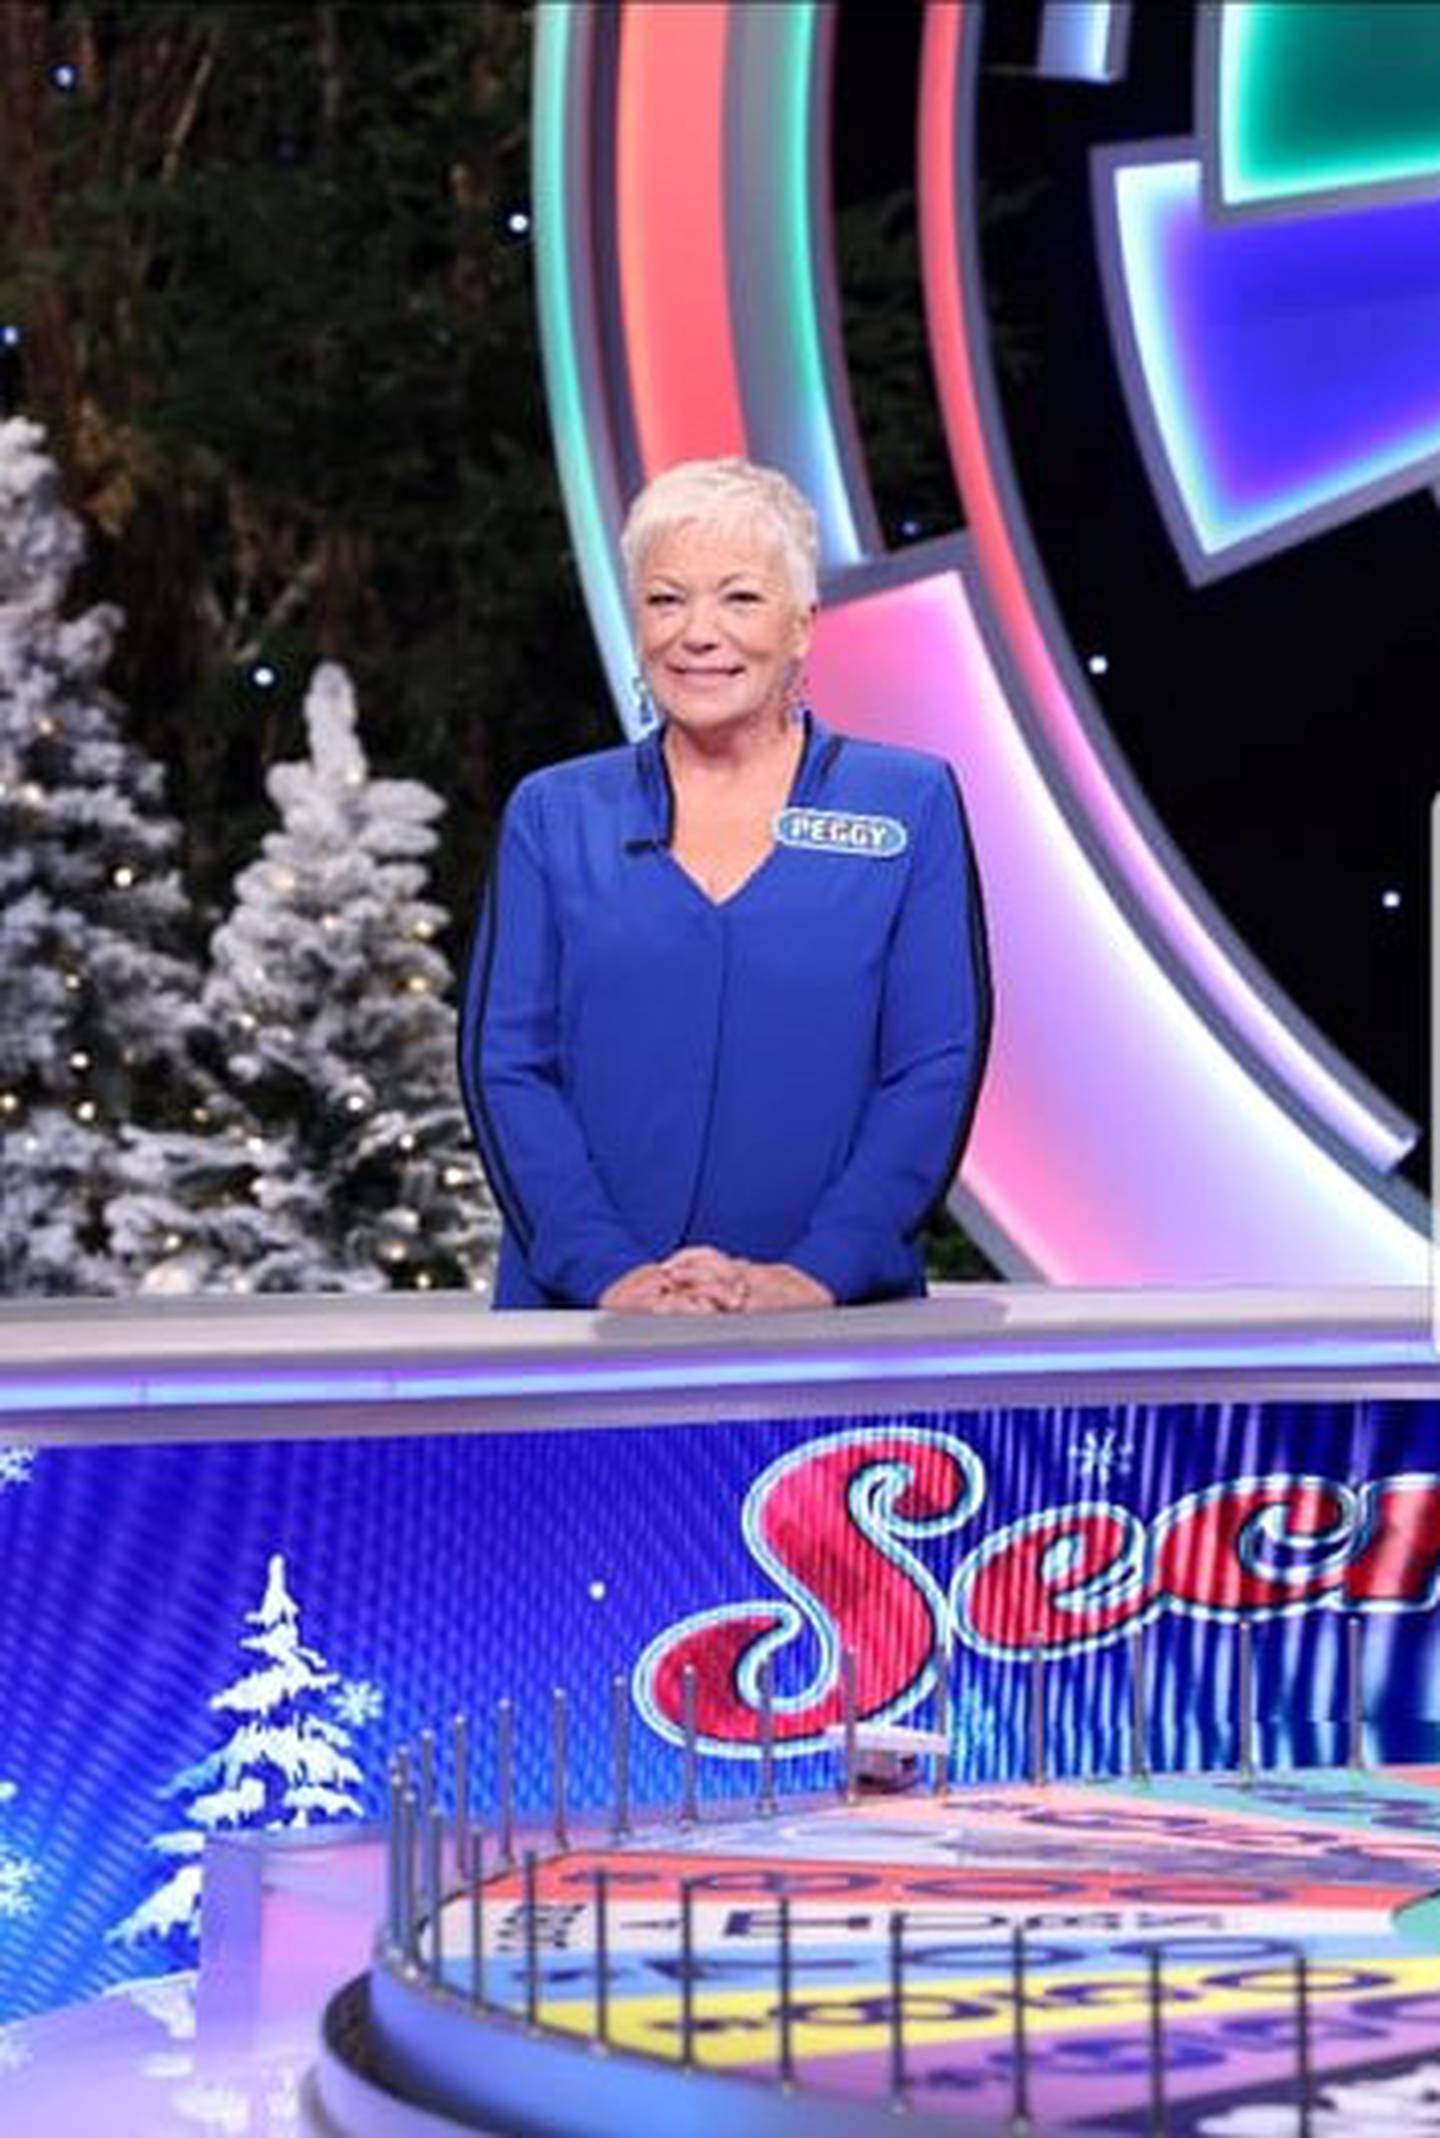 Peggy McEvilly-Reed will appear on a Wheel of Fortune’s “Secret Santa Holiday Giveaway” show at Tuesday, 6:30 p.m., Dec. 14, 2021, on WLS (ABC7). Her mother Ann McEvilly (right, now deceased), was a longtime fan of the show and urged McEvilly-Reed to audition.